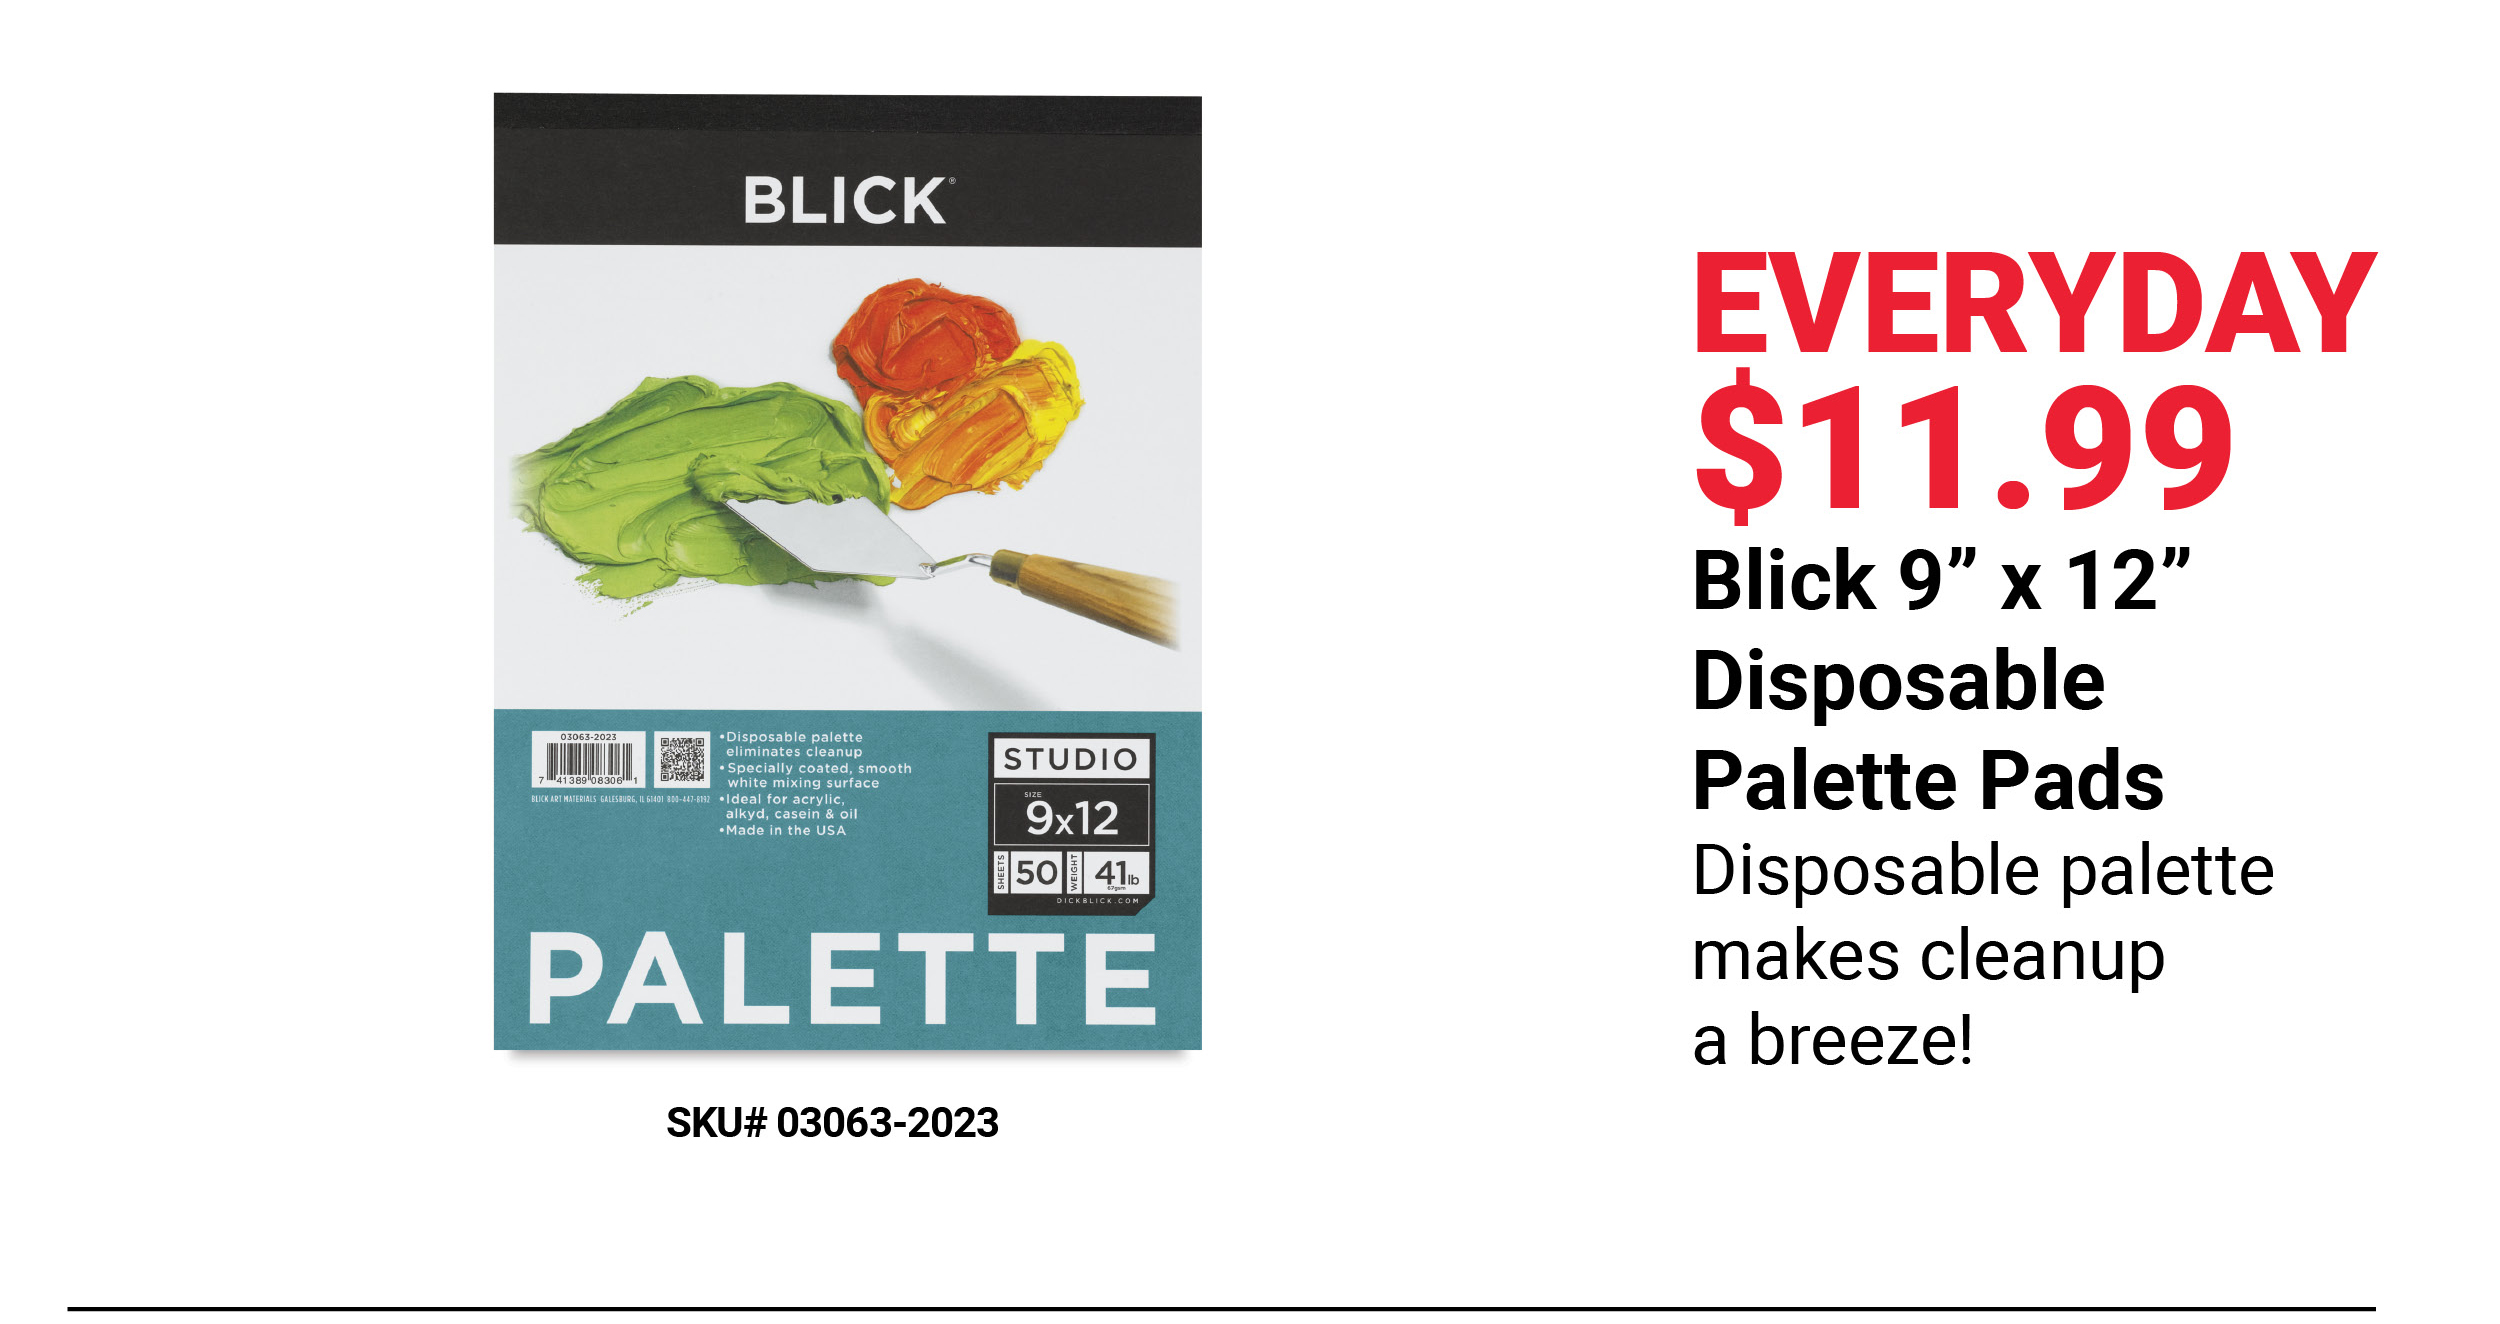 Blick 9"x12" Disposable Palette Pads Everyday $11.99